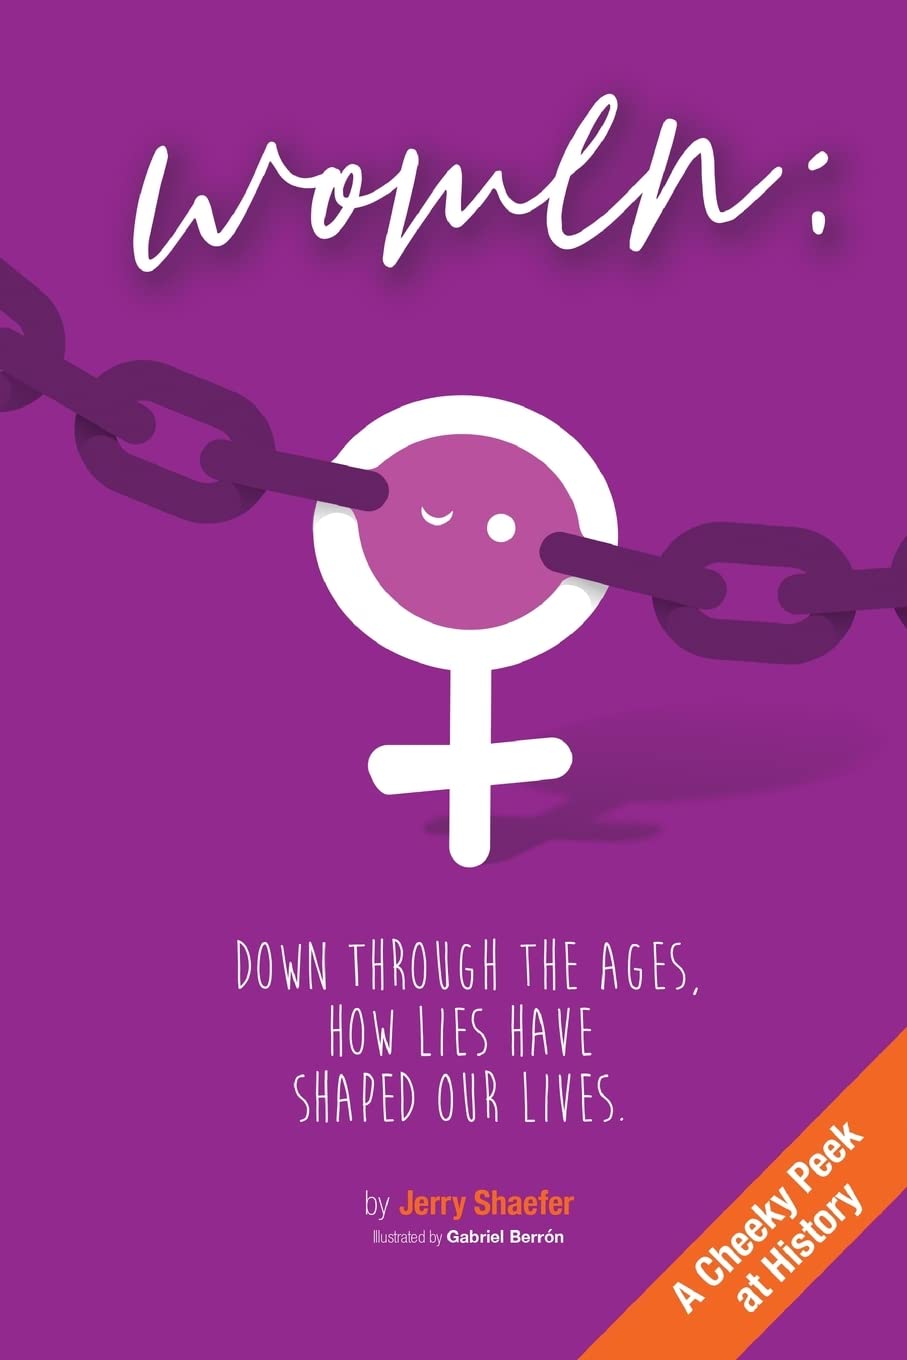 A thought-provoking book exploring gender equality by Jerry Schafer 